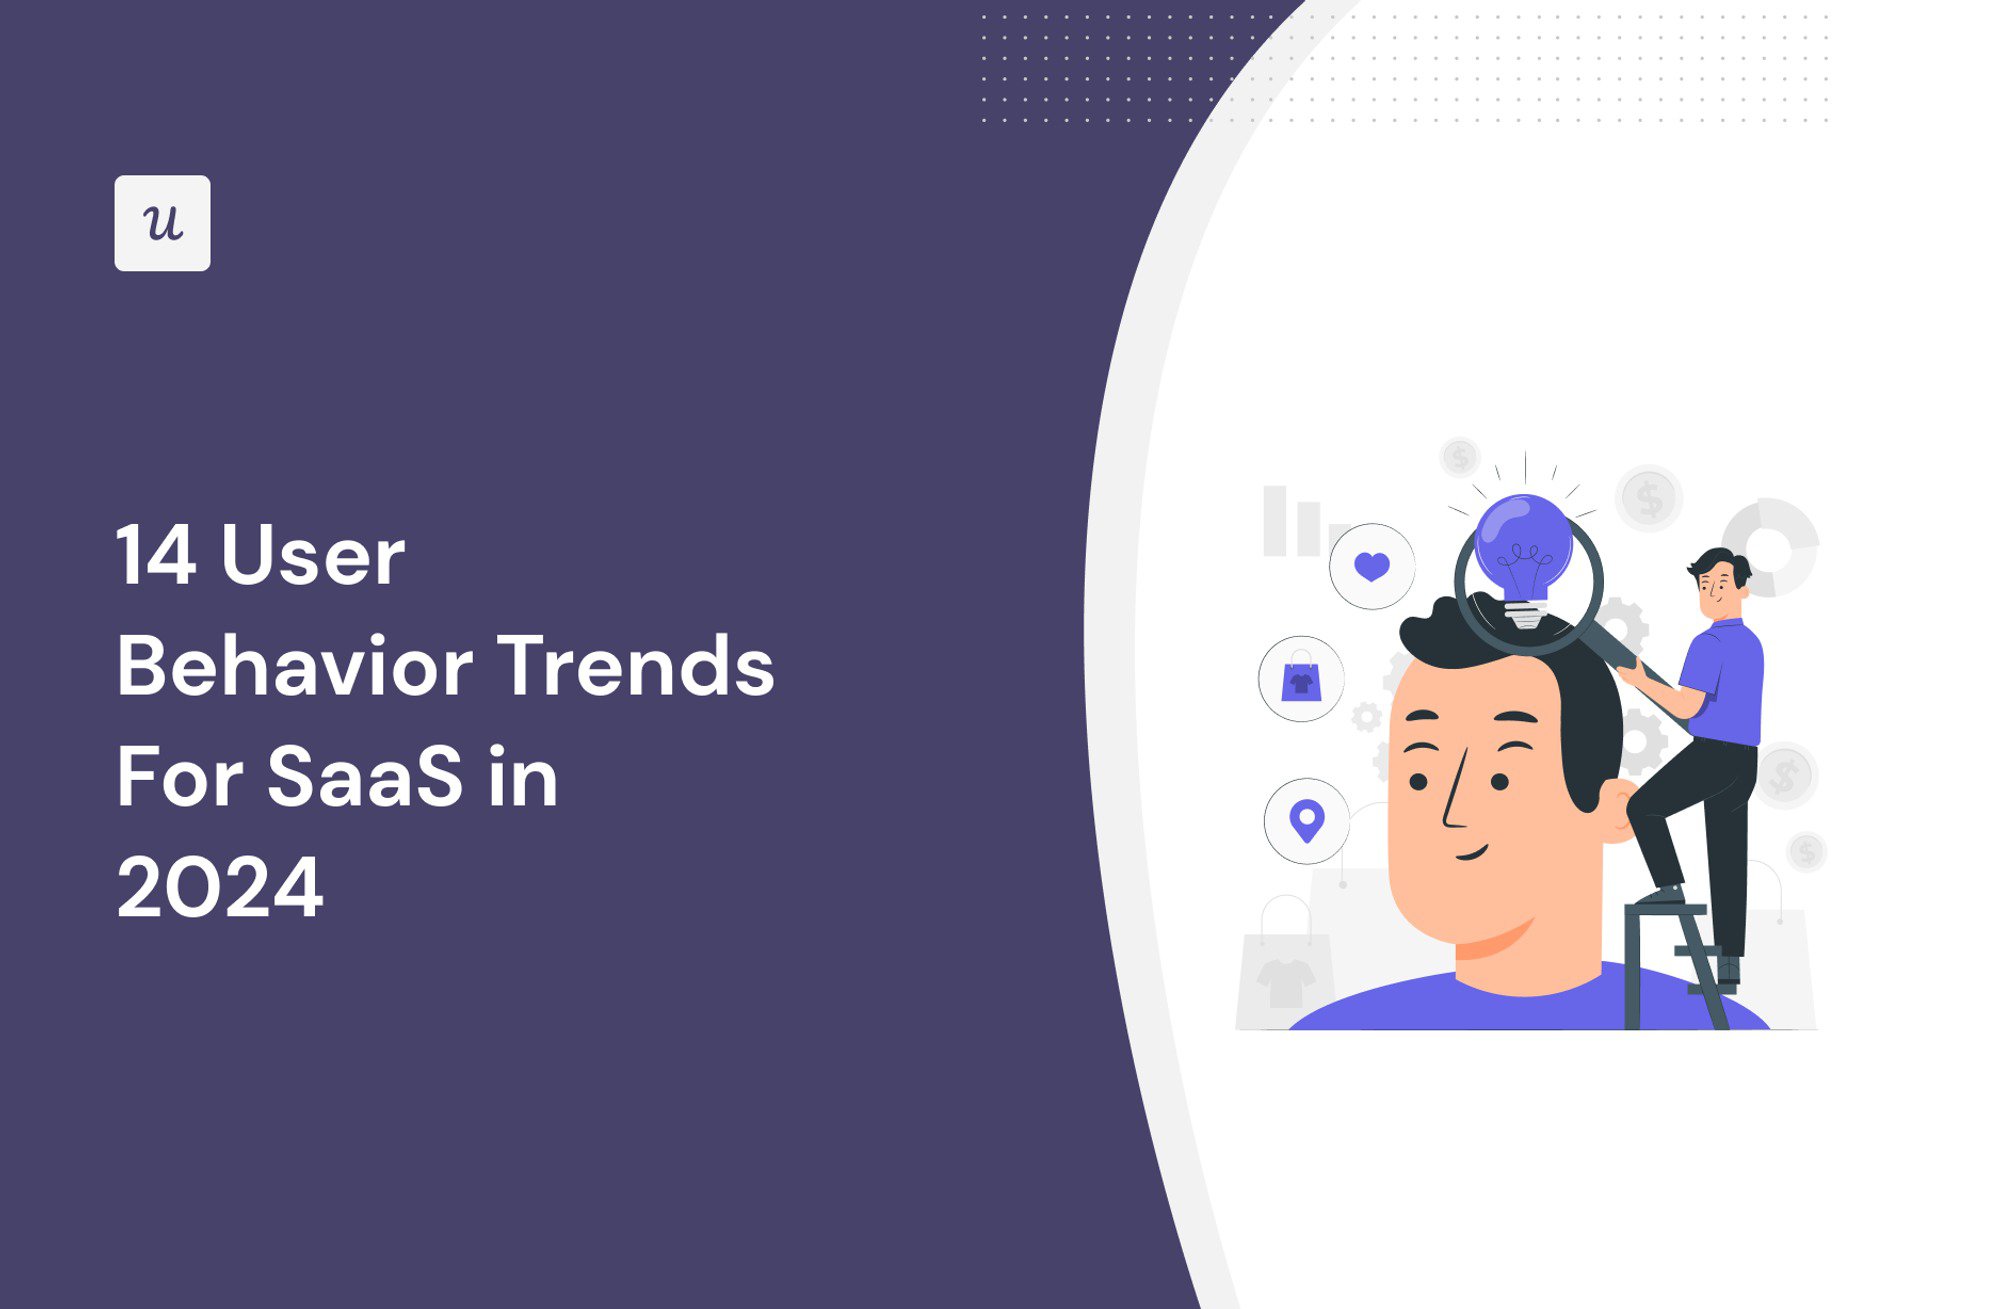 14 User Behavior Trends For SaaS in 2024 cover